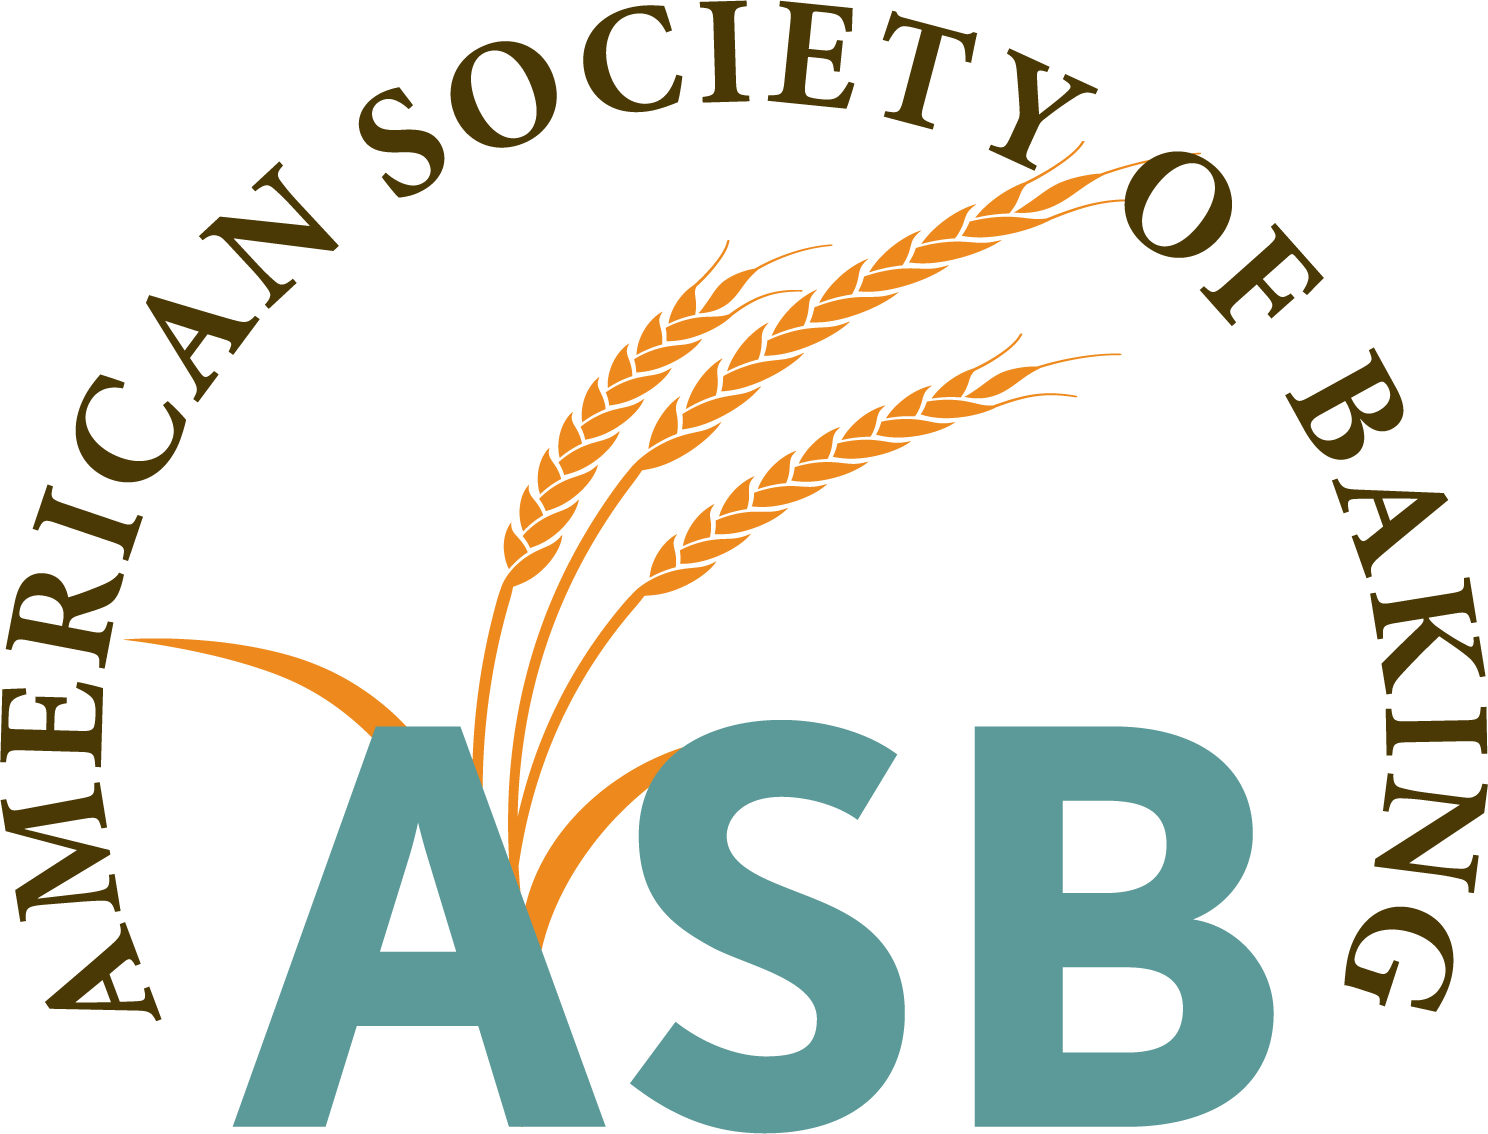 The American Society of Baking announces board of directors